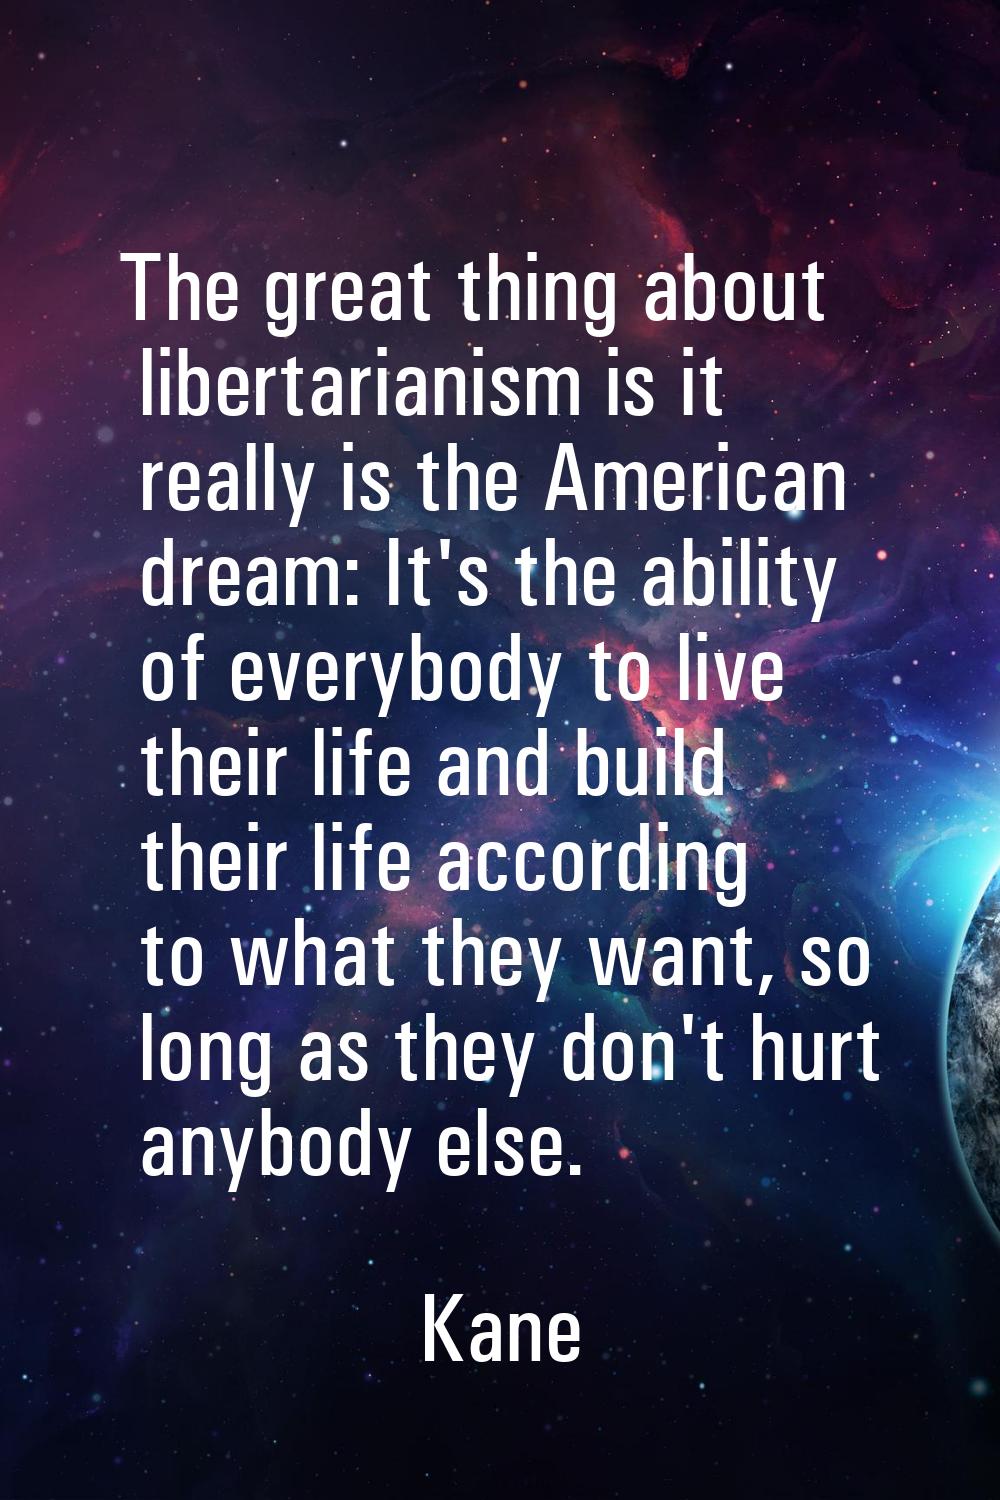 The great thing about libertarianism is it really is the American dream: It's the ability of everyb